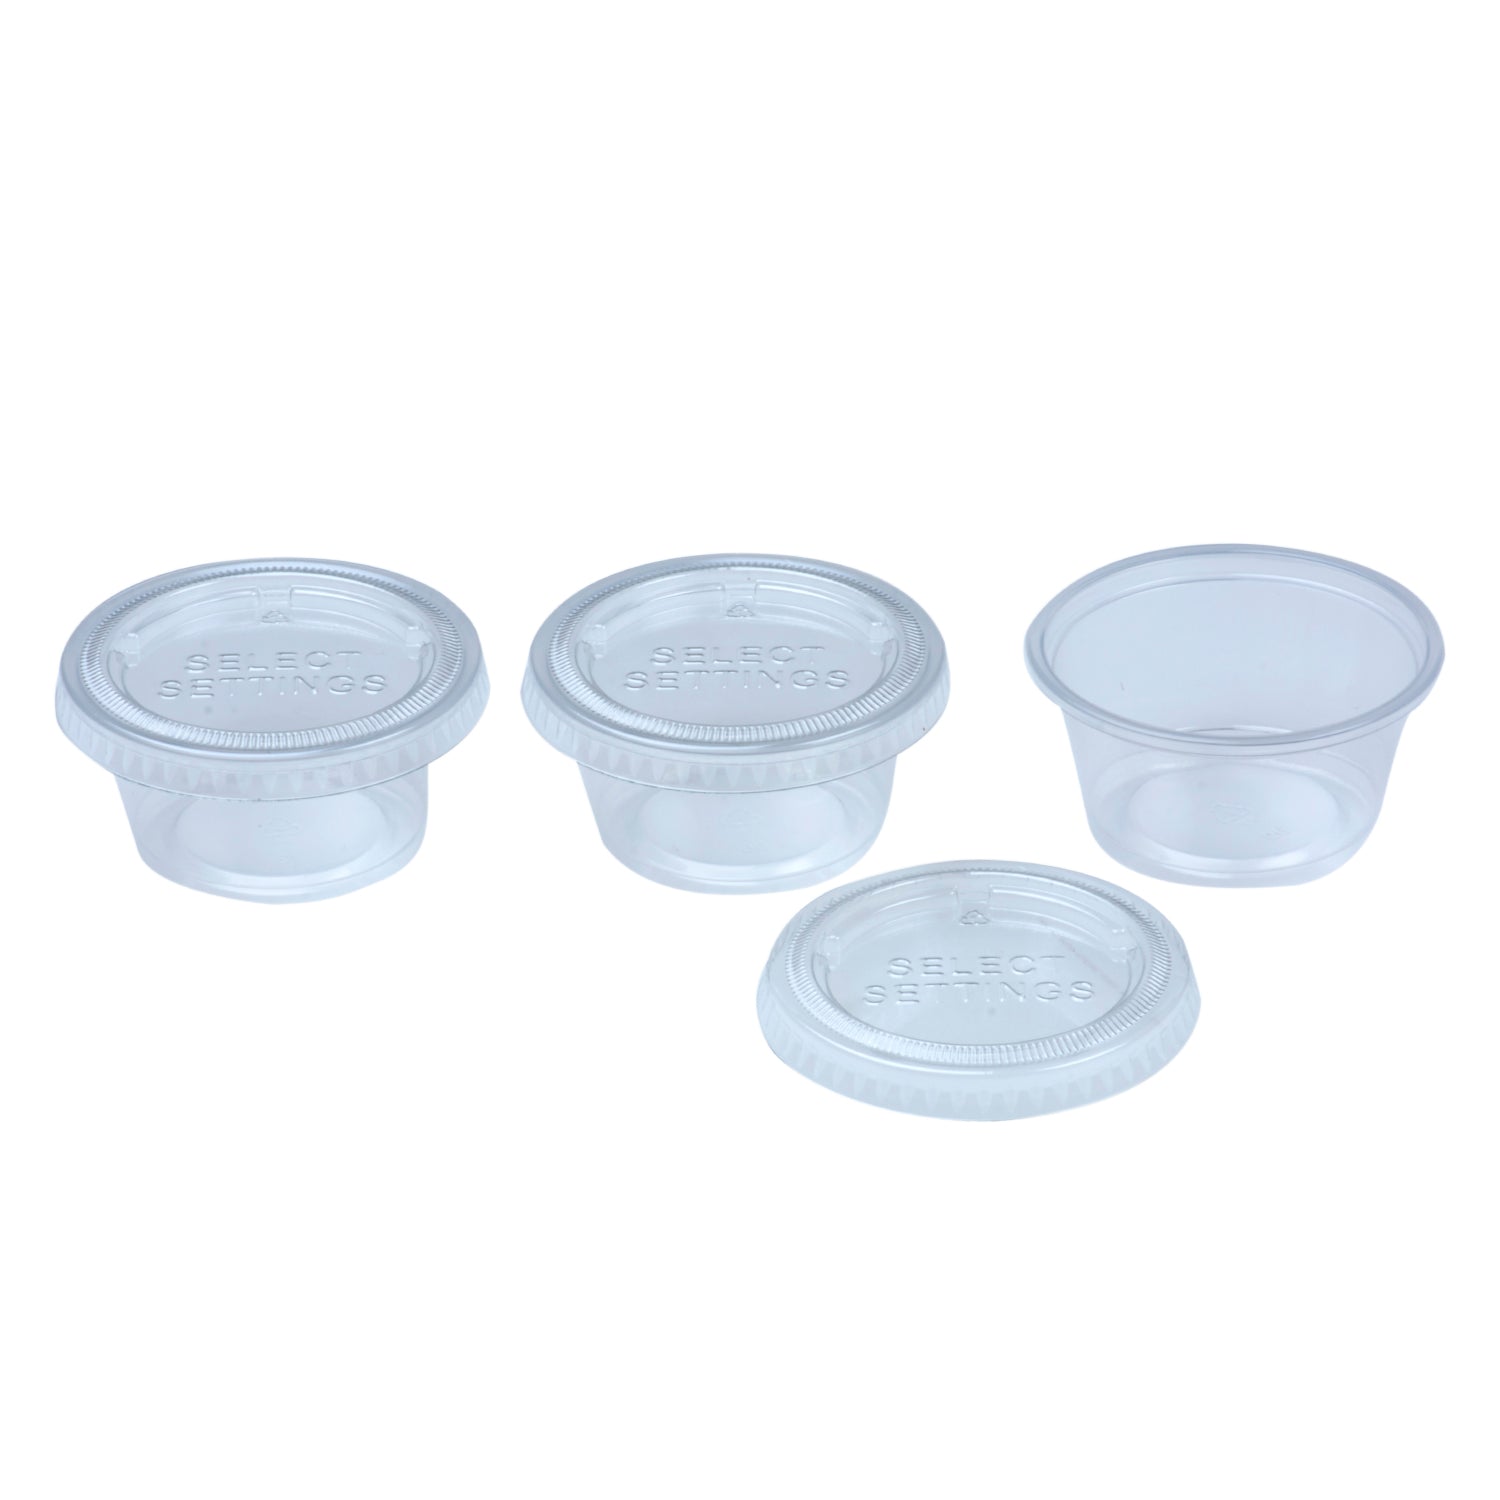 Condiment Cups container with Lids- 8 pk. 1 oz.Salad Dressing